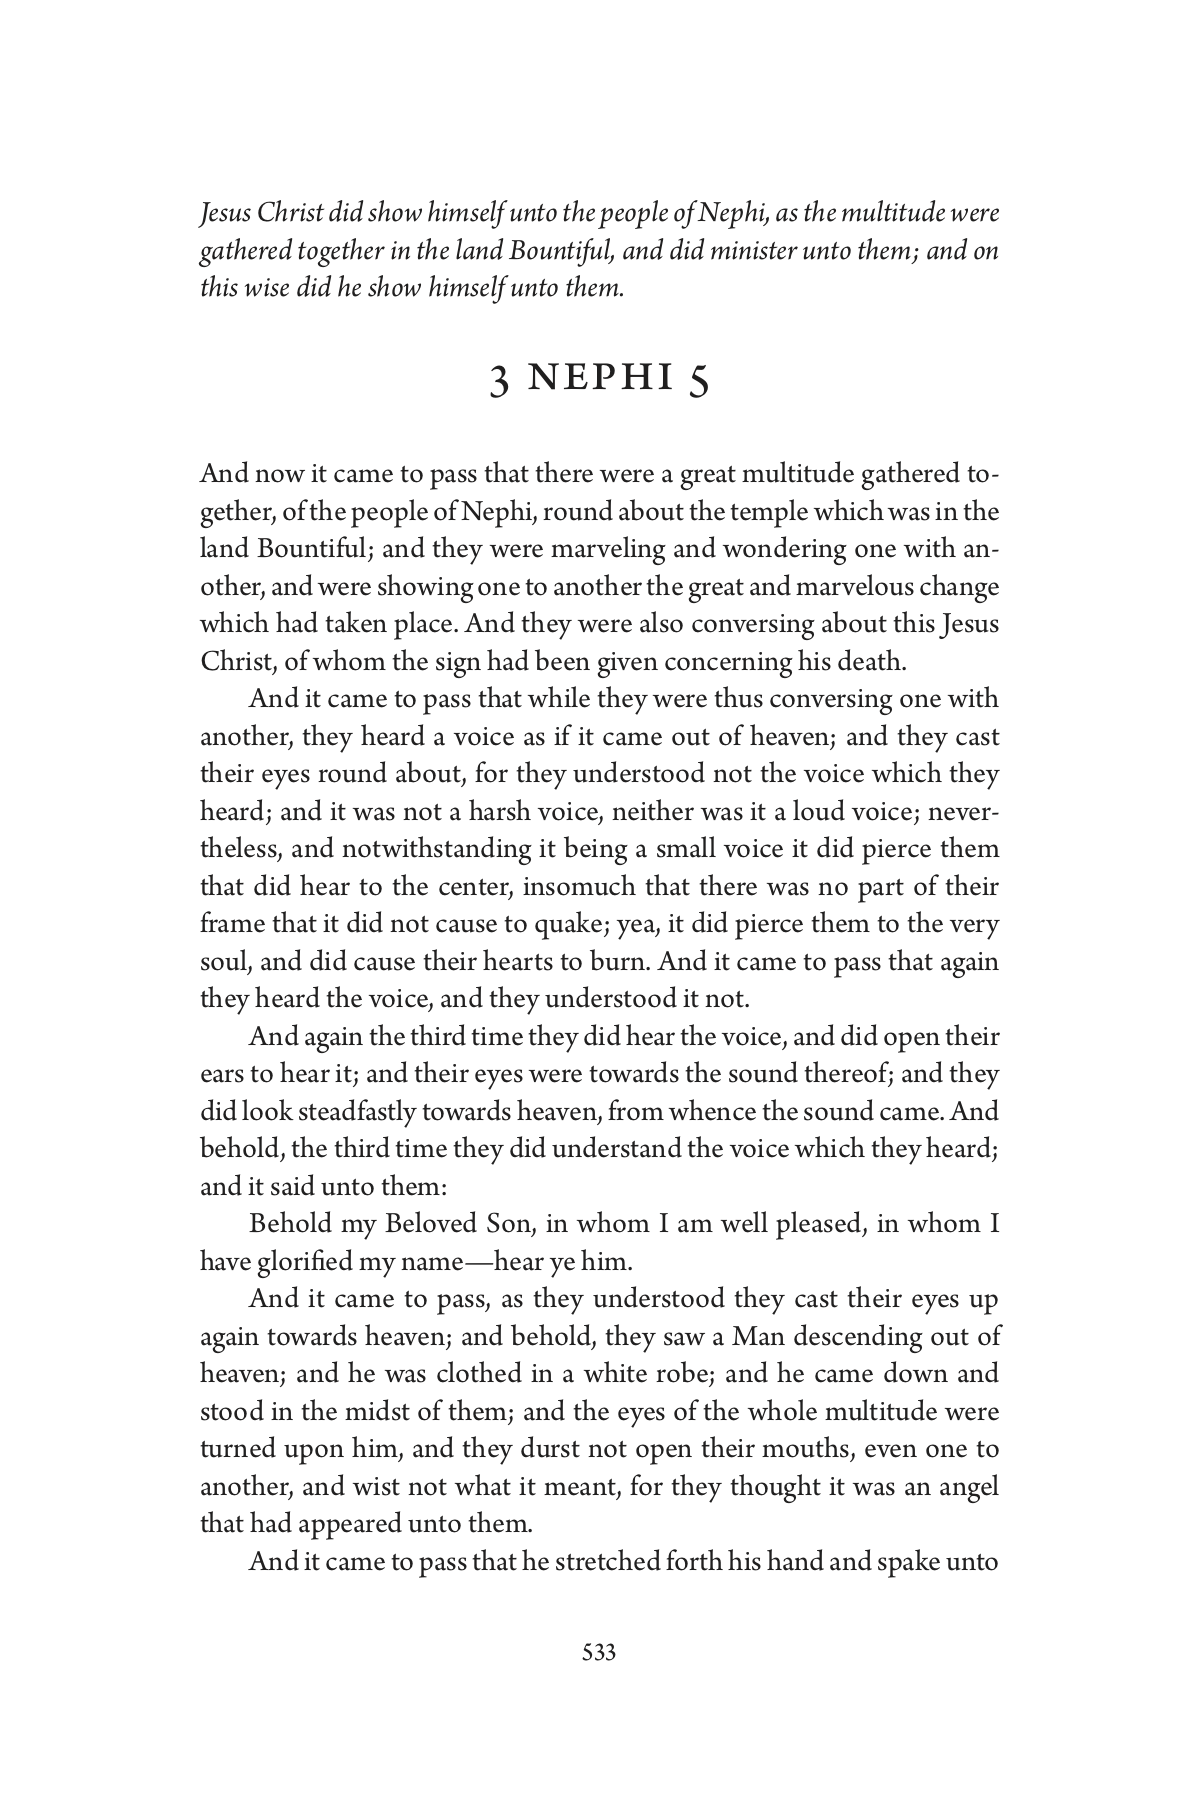 projects/readers-edition/readers-edition-eng-bofm-3nephi5.png?v1